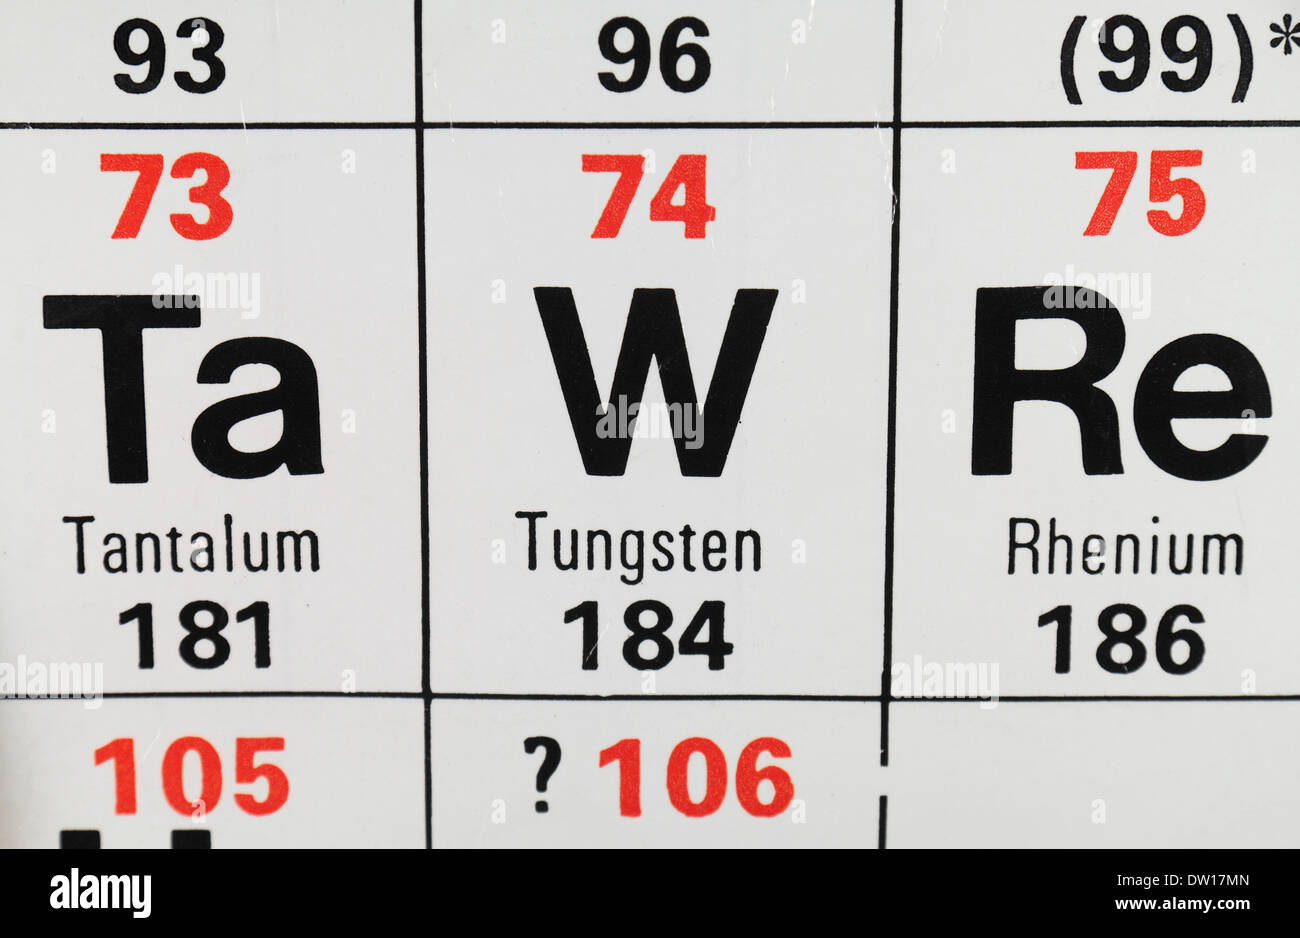 Tungsten (W) as it appears on the Periodic Table. Stock Photo